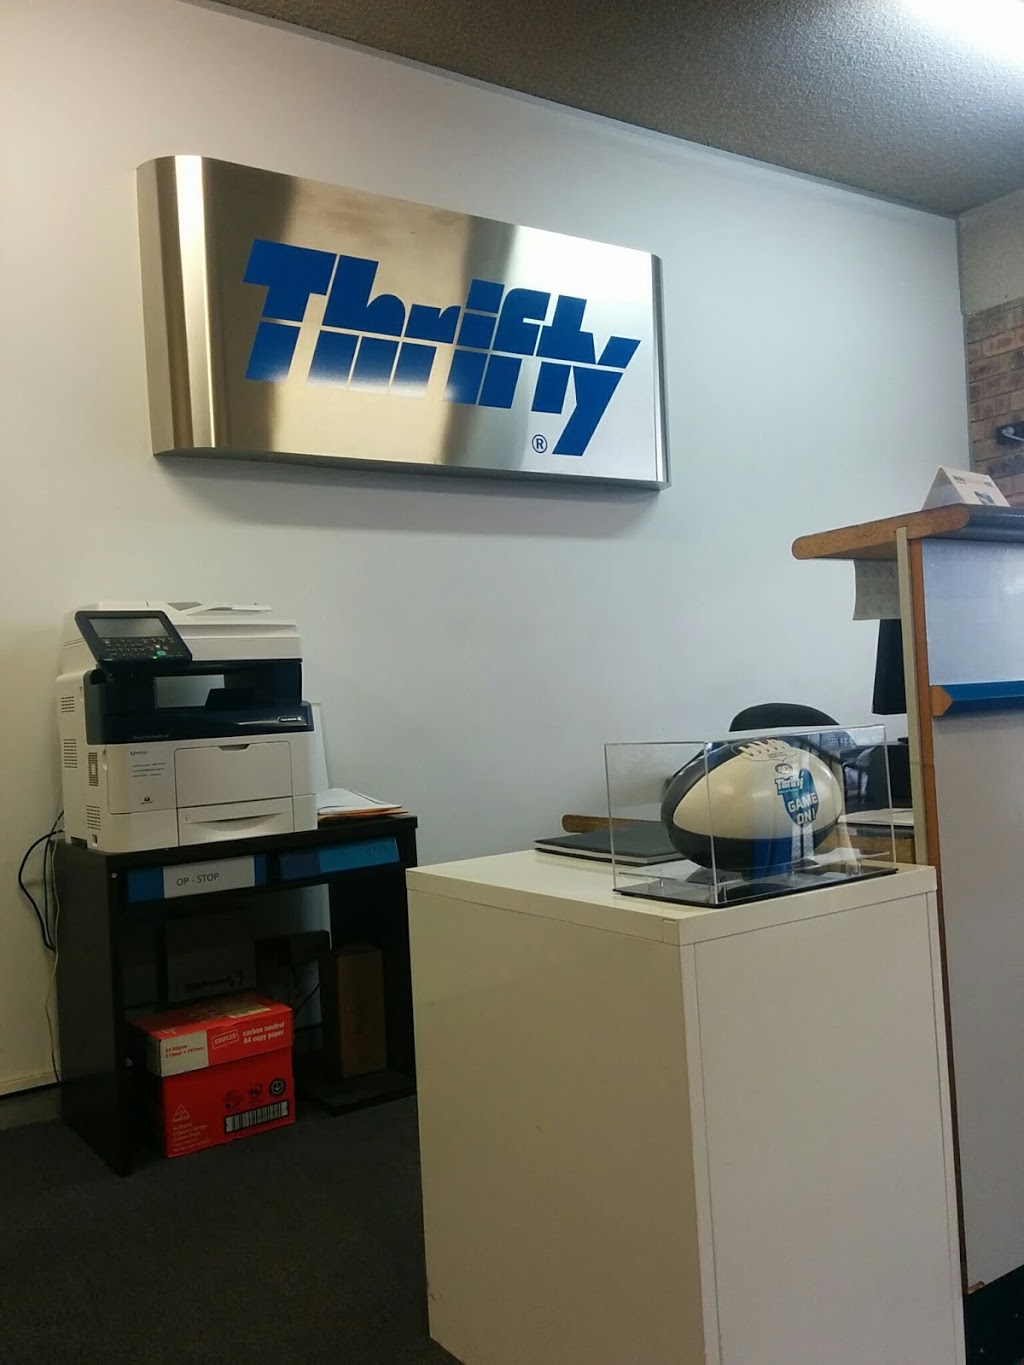 Thrifty Car & Truck Rental Hornsby | car rental | 55 Jersey St, Hornsby NSW 2077, Australia | 0294507688 OR +61 2 9450 7688